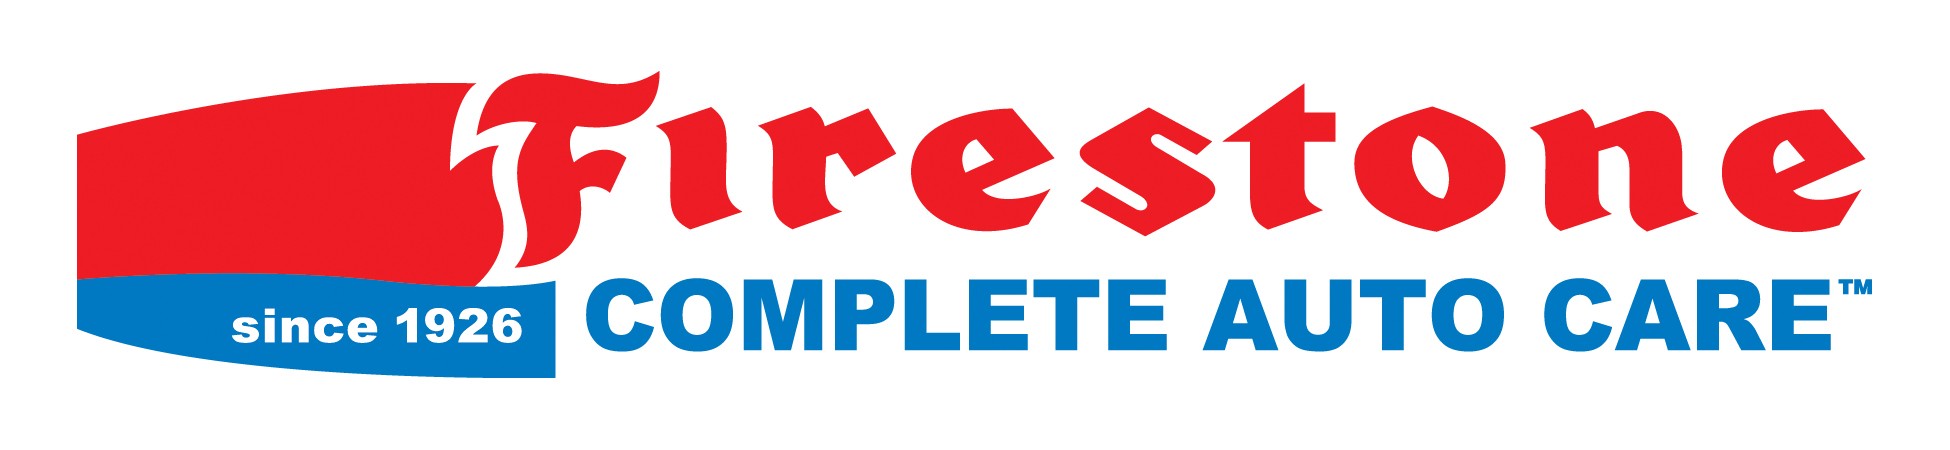 Firestone Complete Autocare - Up To 20% Off + Free P&P on Firestone Complete Auto Care Products